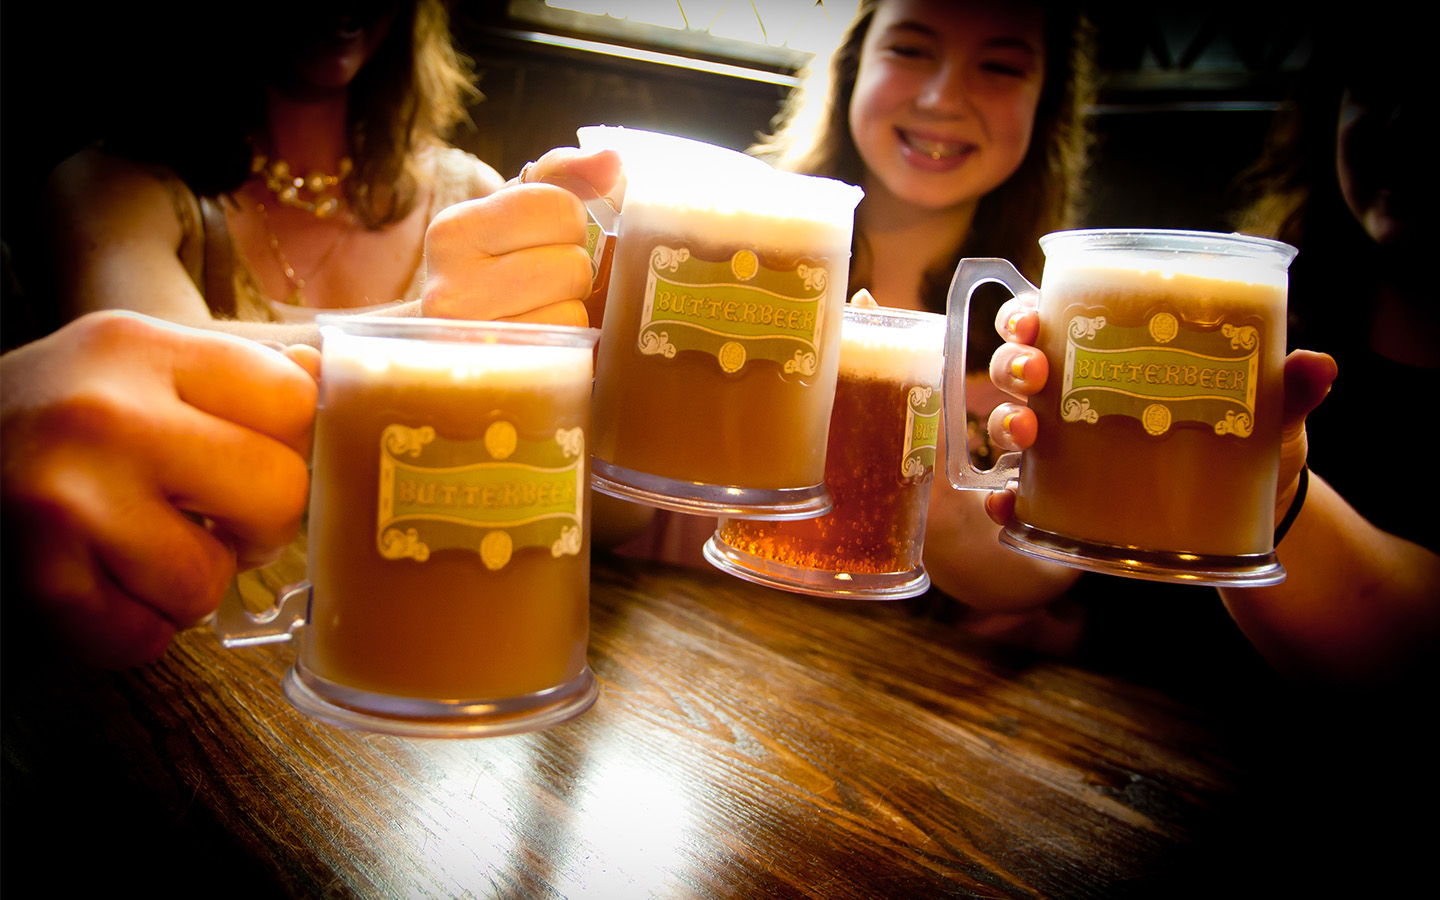 Enjoy a refreshing frozen Butterbeer at The Wizarding World of Harry Potter at Universal Orlando Resort.